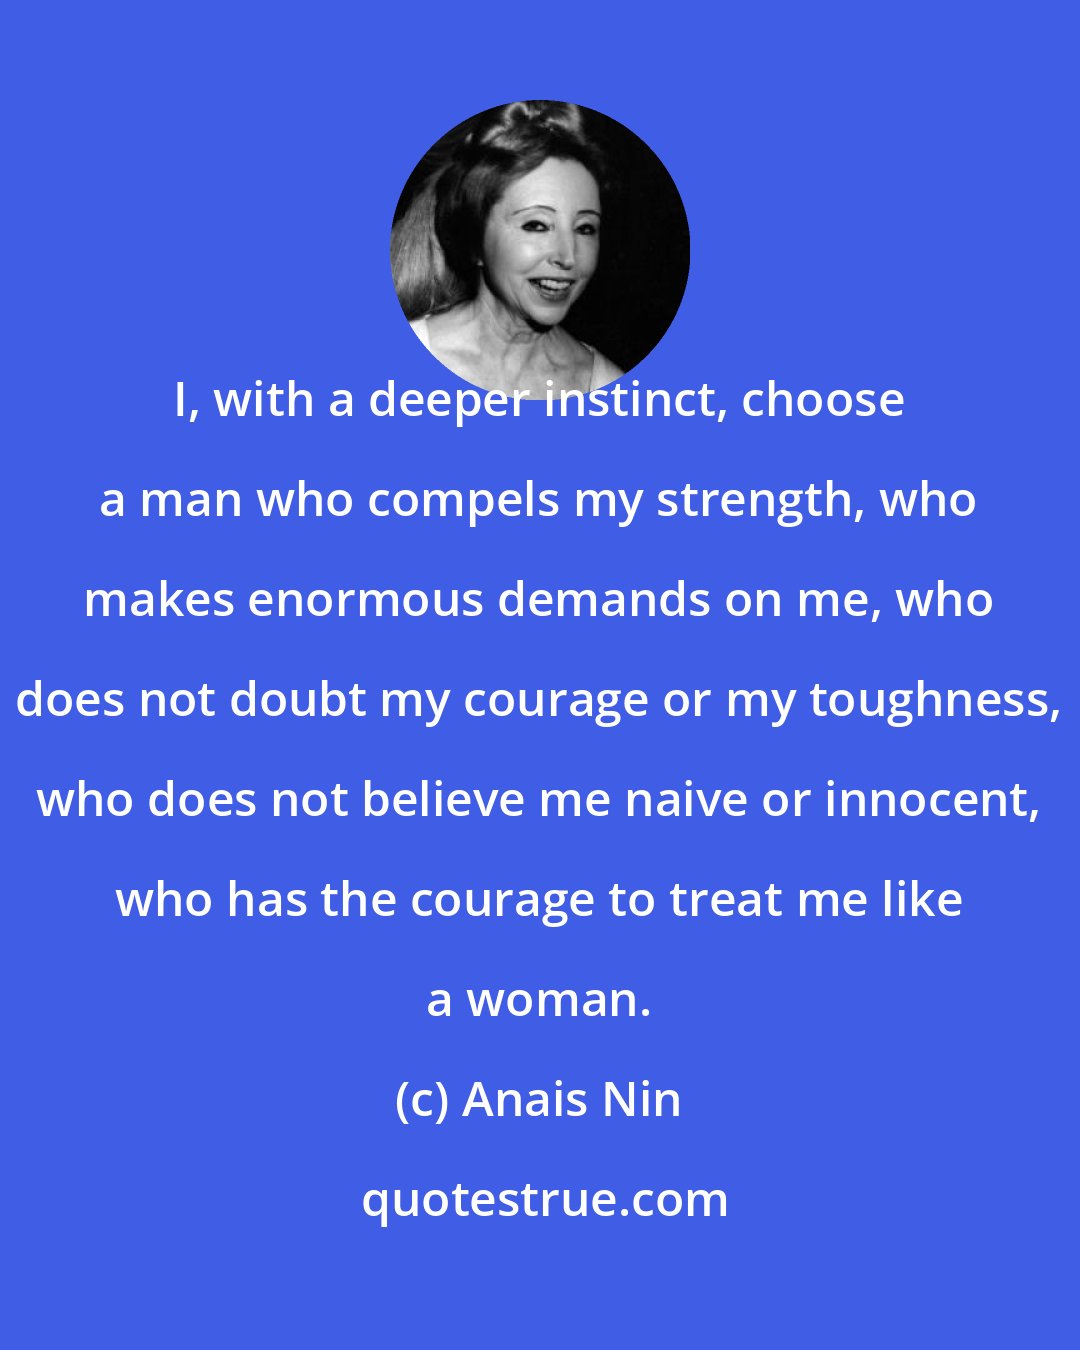 Anais Nin: I, with a deeper instinct, choose a man who compels my strength, who makes enormous demands on me, who does not doubt my courage or my toughness, who does not believe me naive or innocent, who has the courage to treat me like a woman.